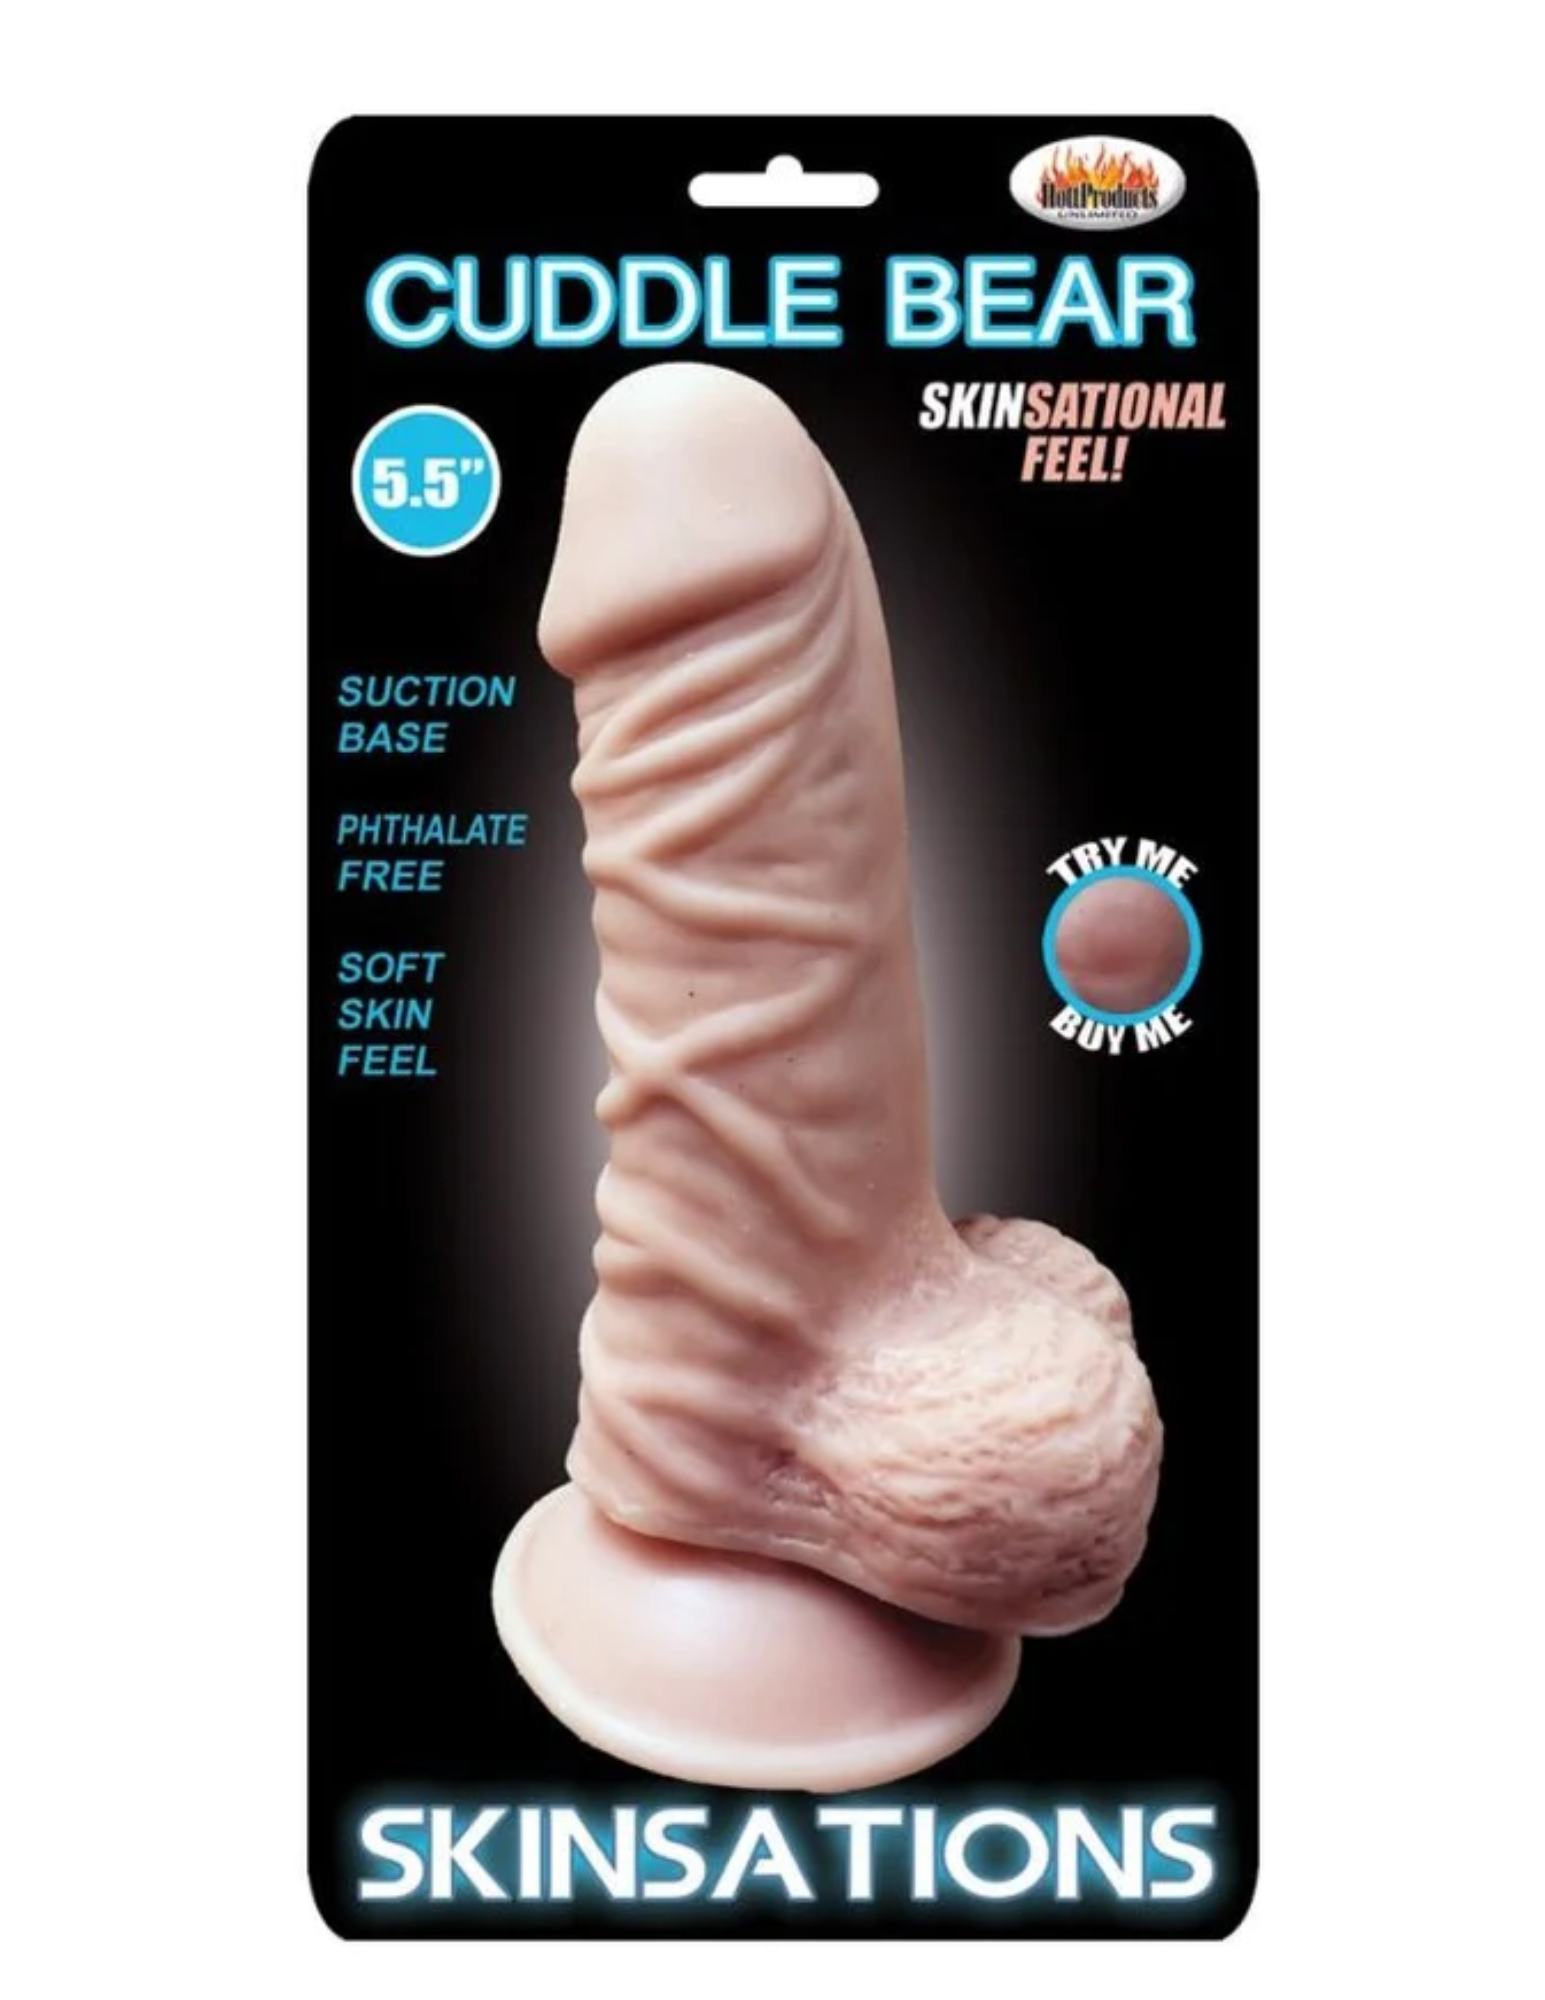 Photo for the Skinsations Cuddle Bear Dildo from Hott Products product and package.